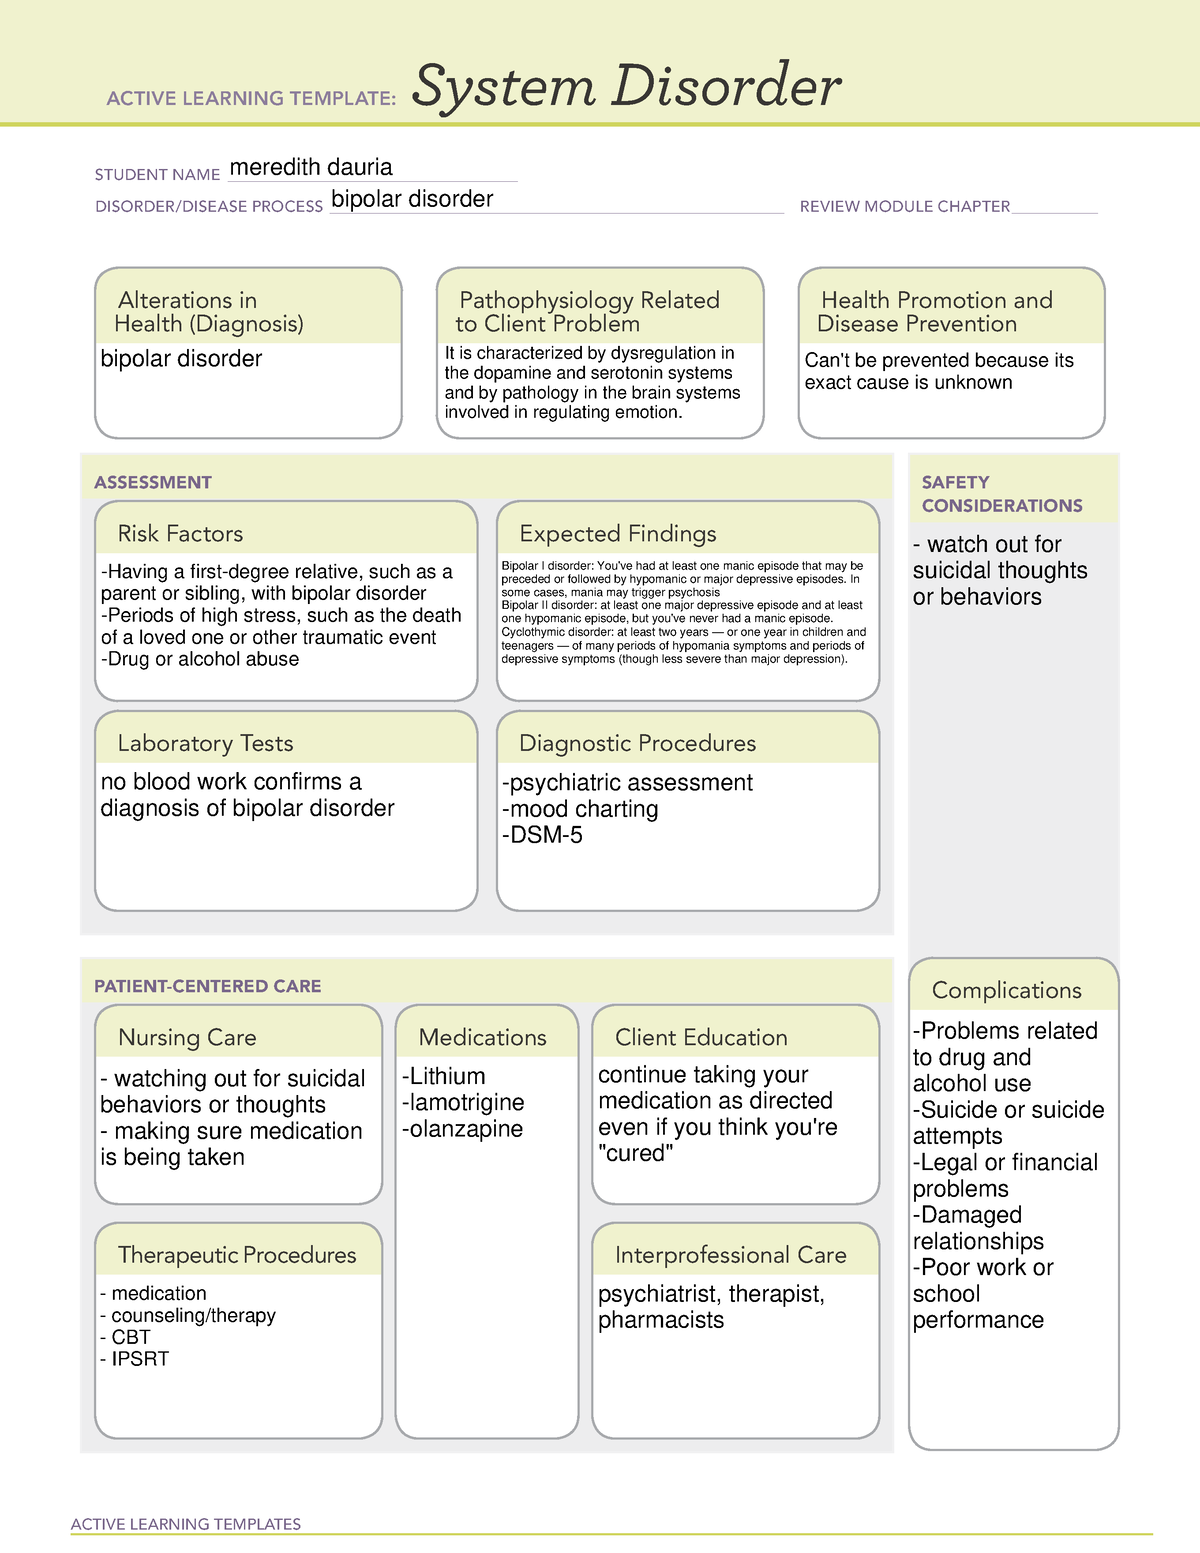 ATI active learning template bipolar disorder - ACTIVE LEARNING ...